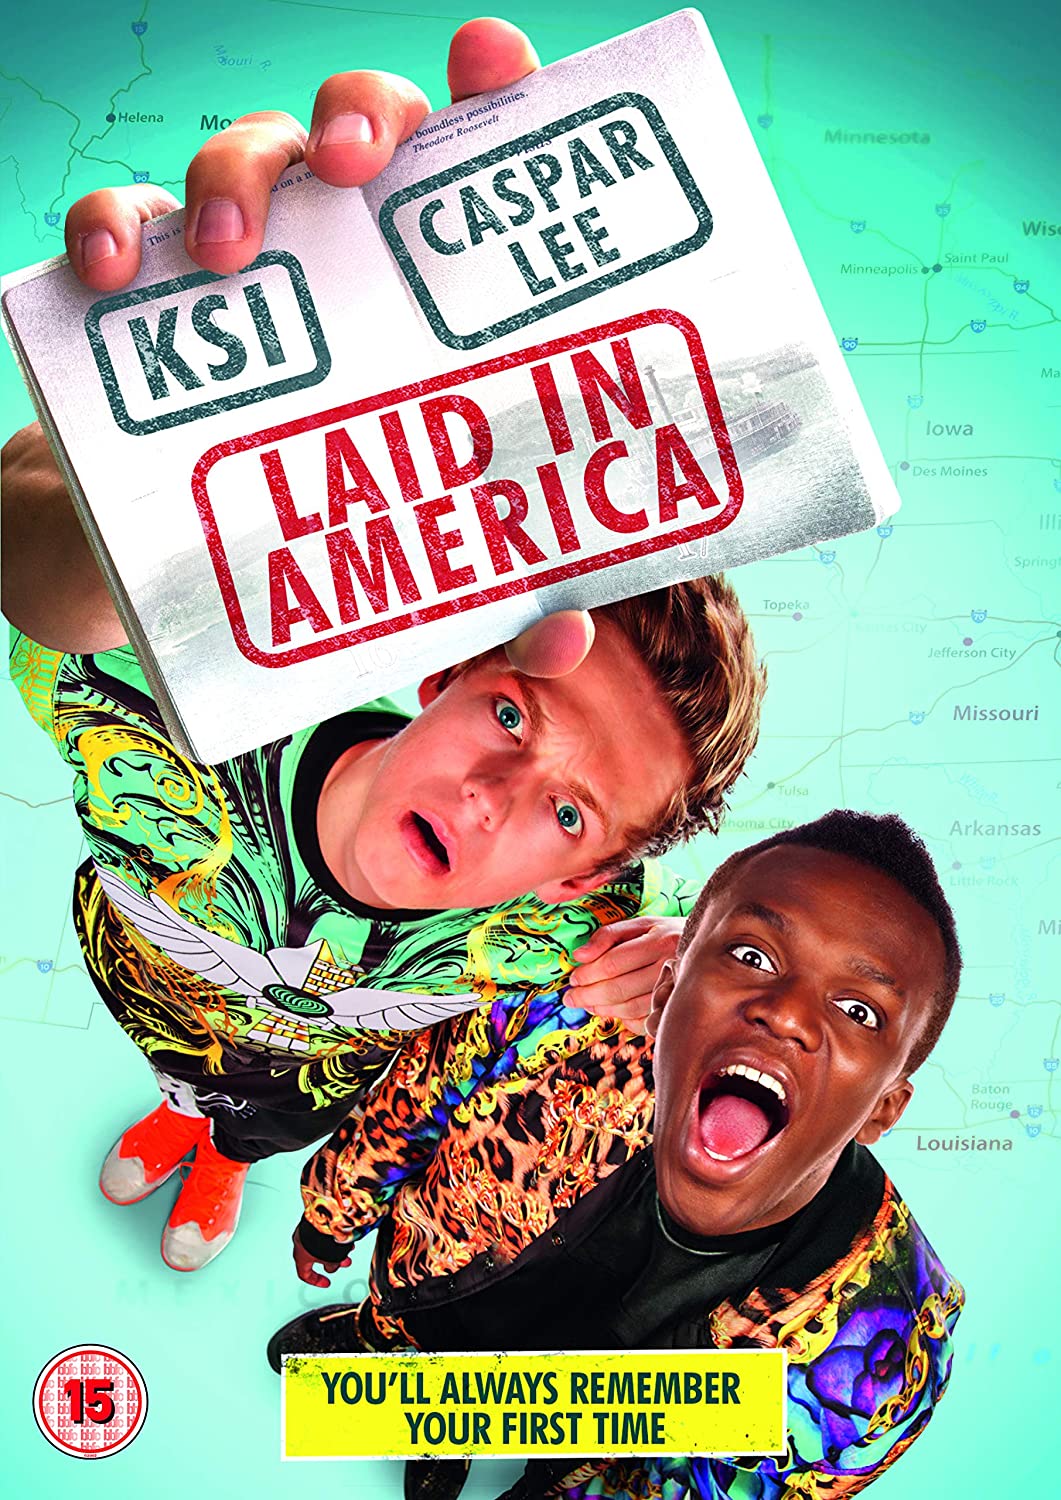 Laid In America - Comedy [DVD]